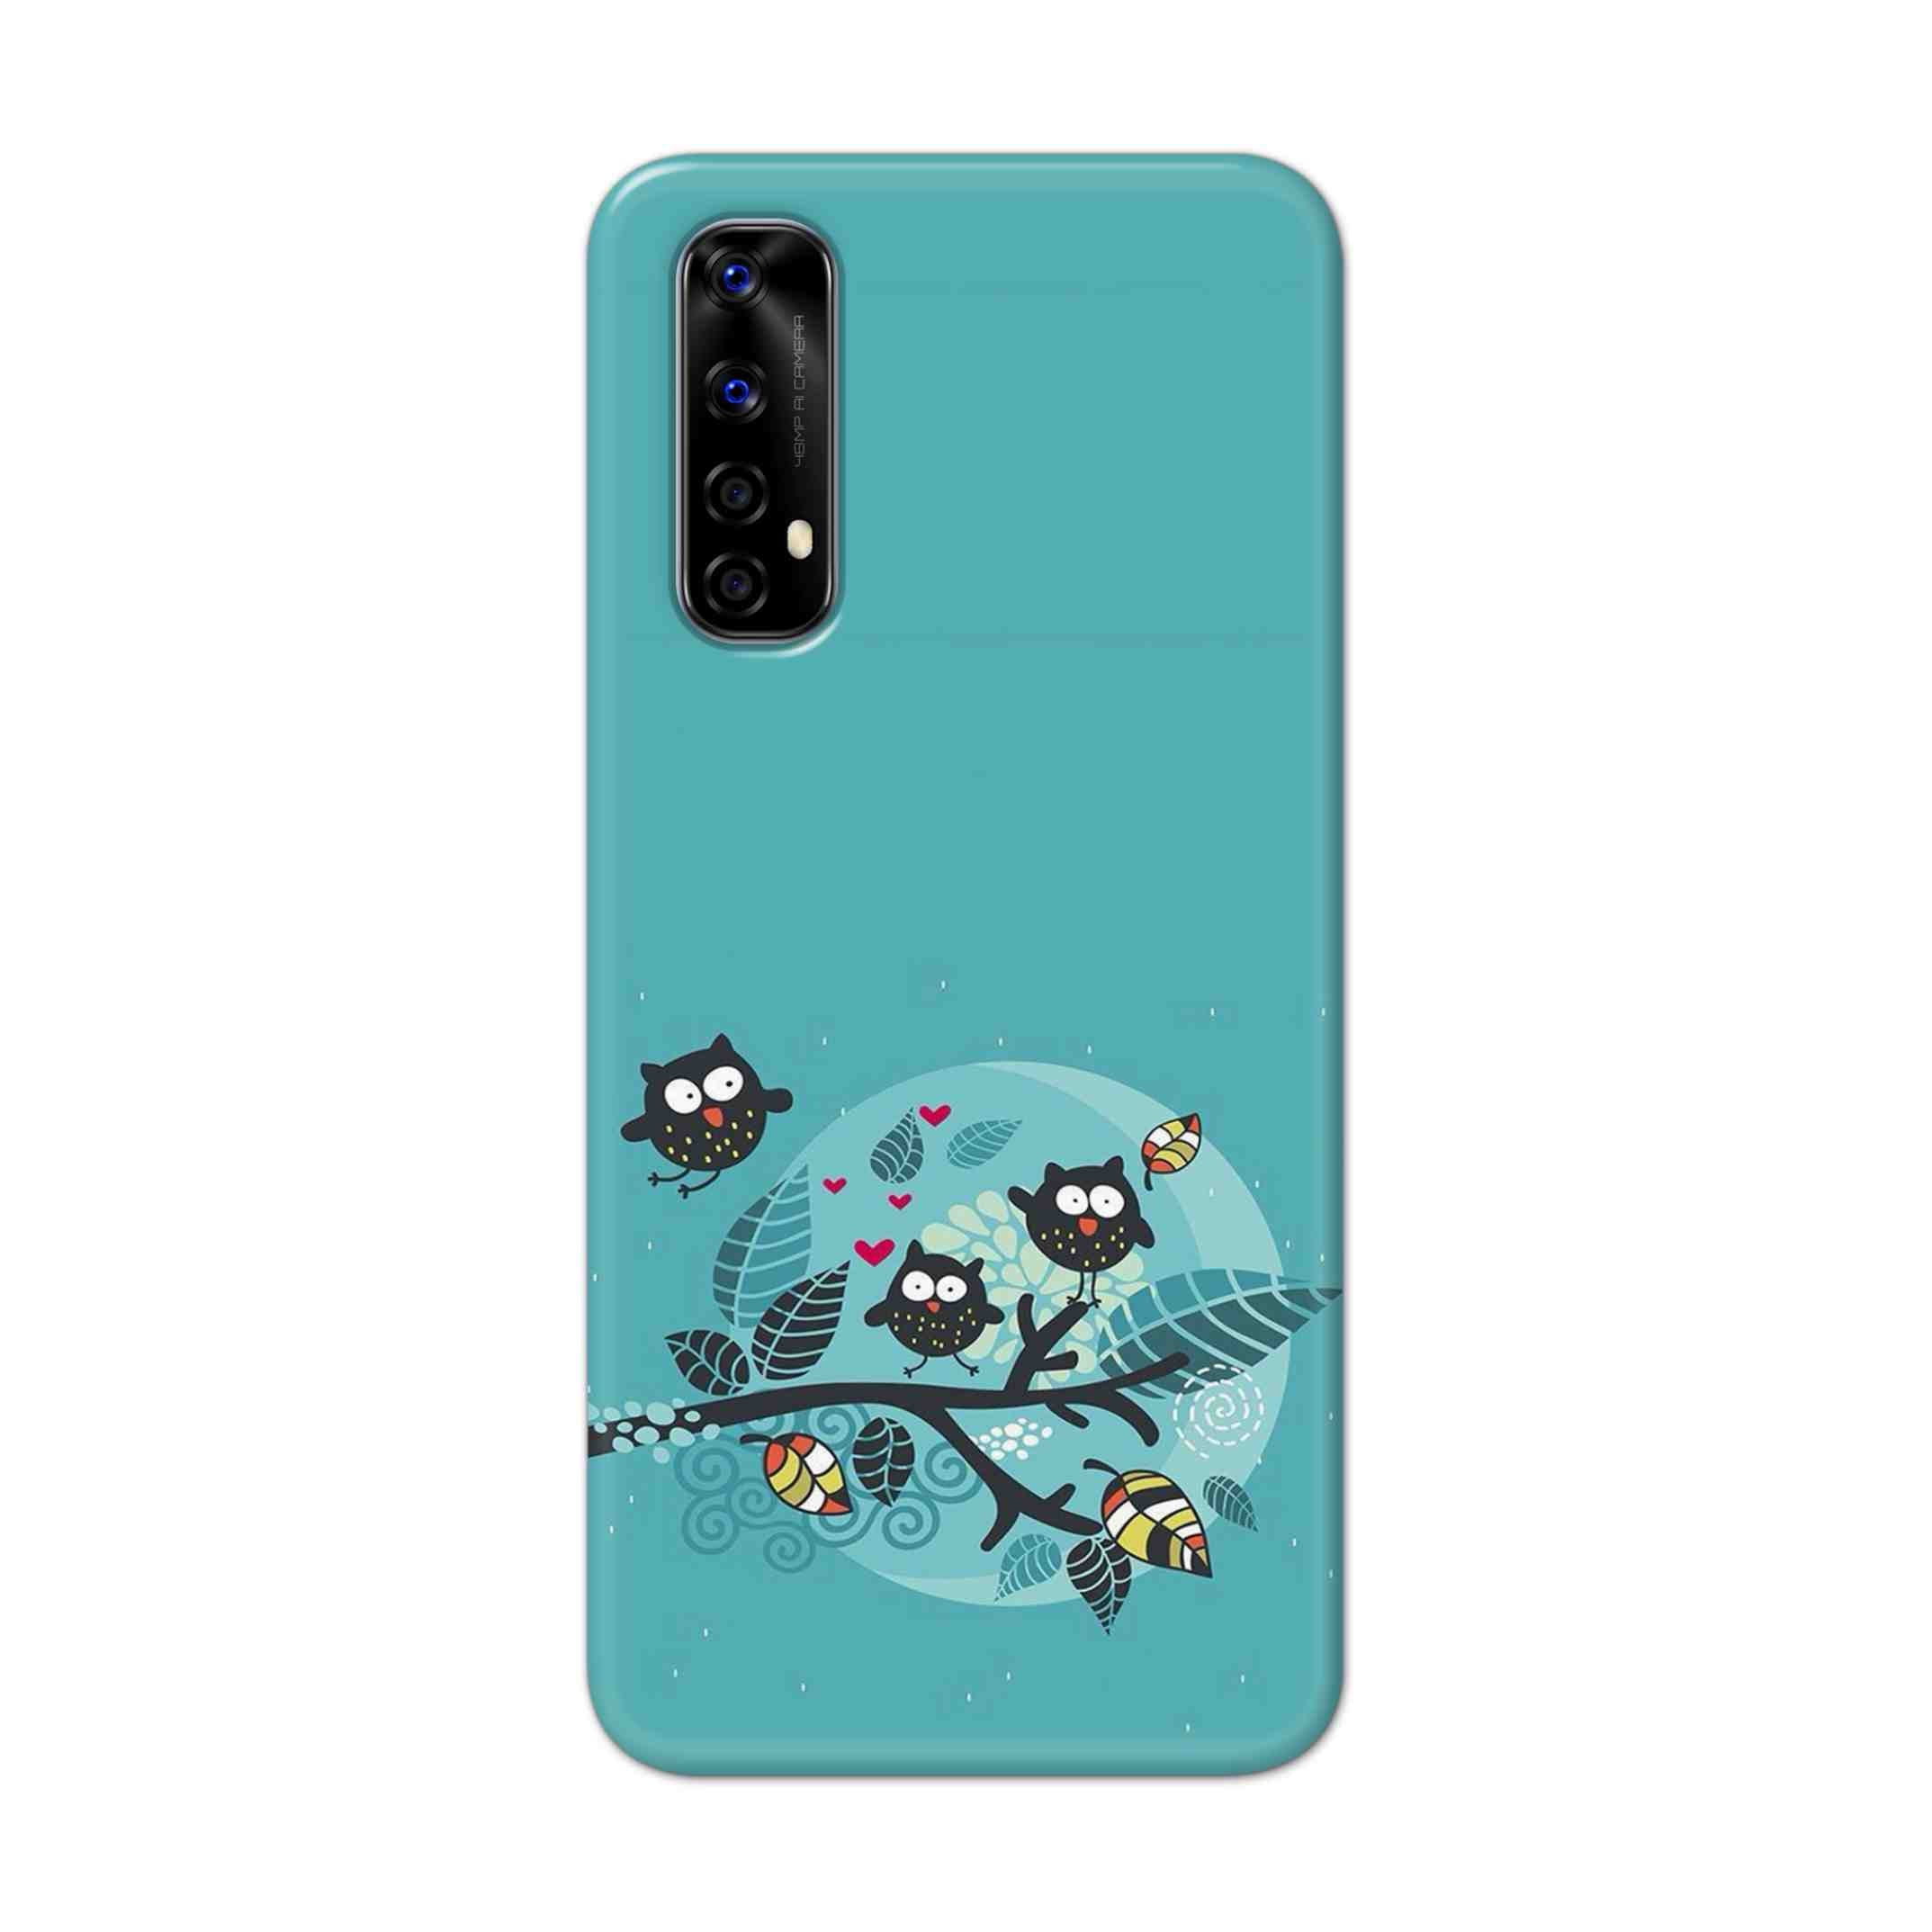 Buy Owl Hard Back Mobile Phone Case Cover For Realme Narzo 20 Pro Online